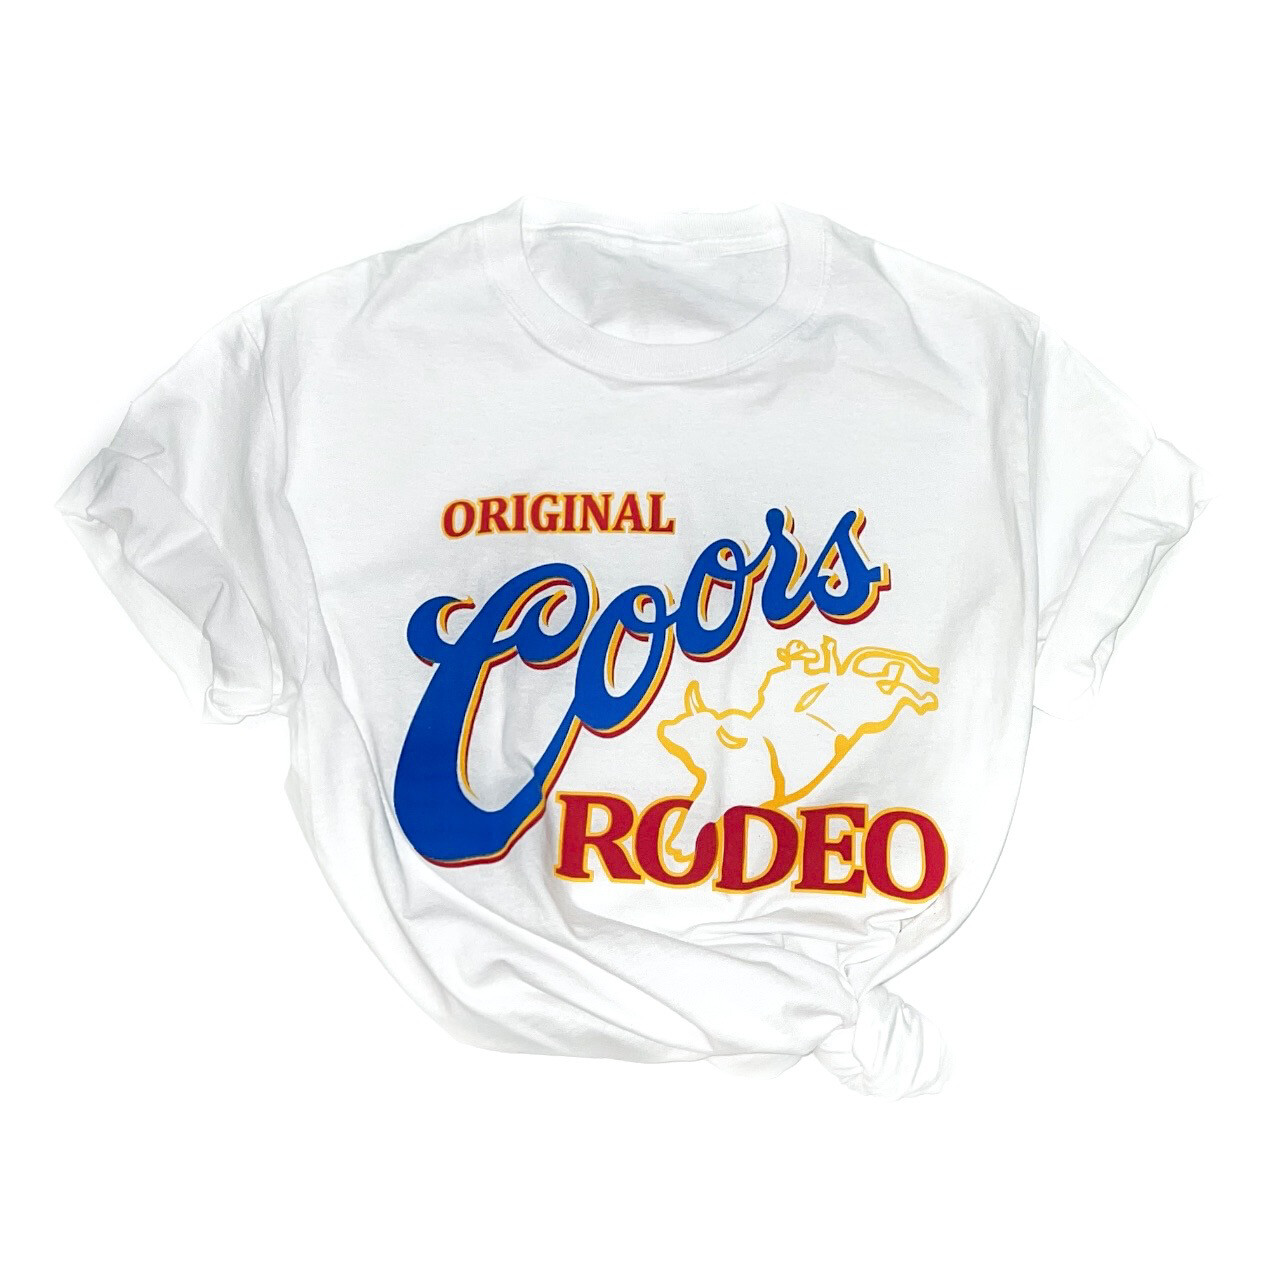 Coors Rodeo Tee - White